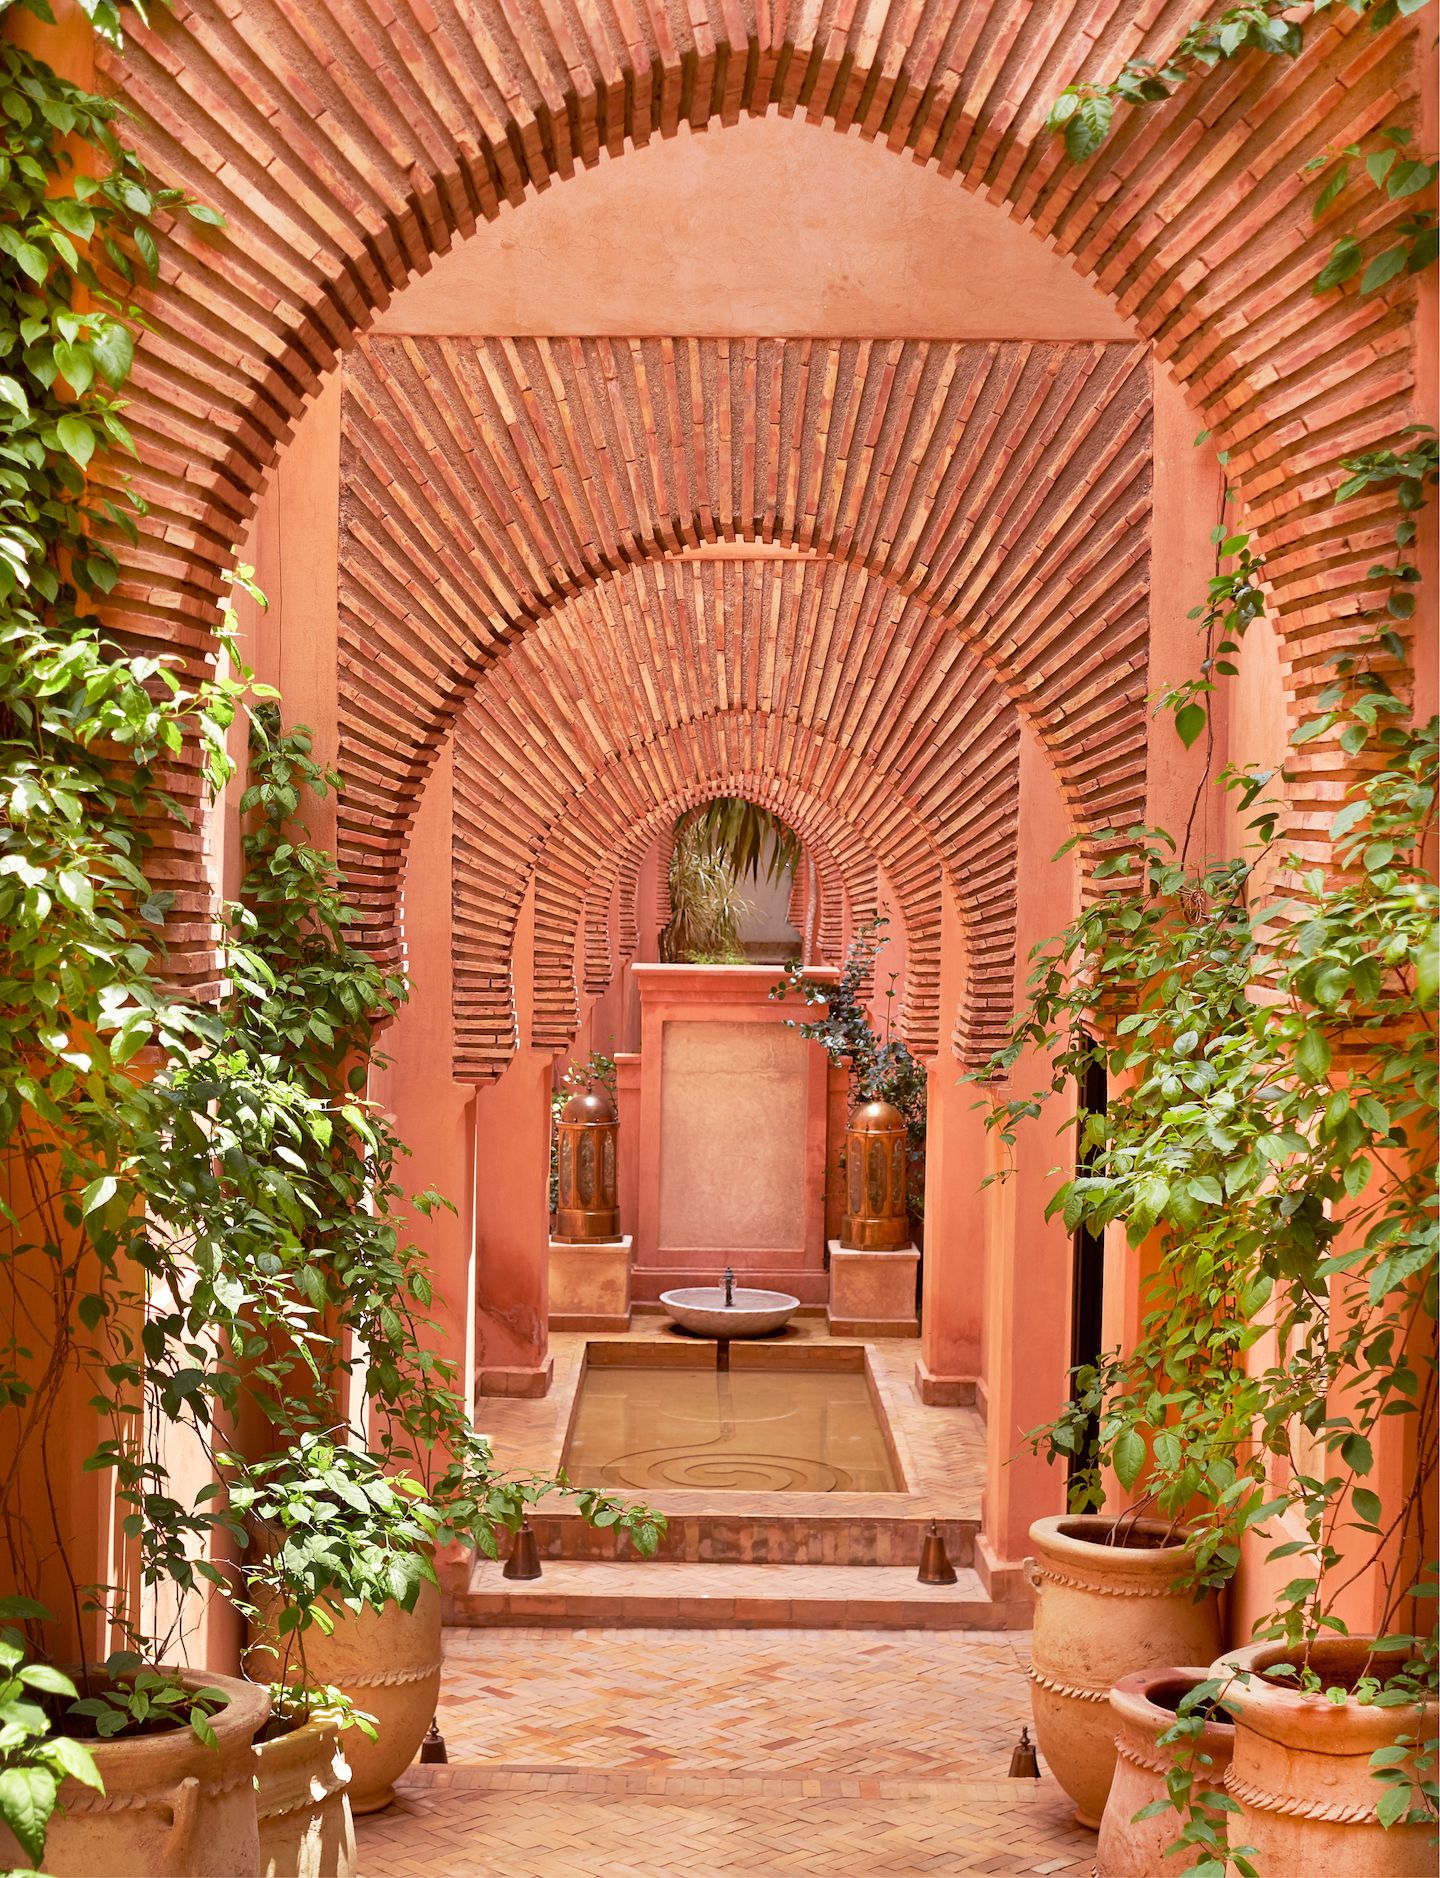 Inside Marrakesh: Peek Into One Of The Most Beautiful Places On Earth